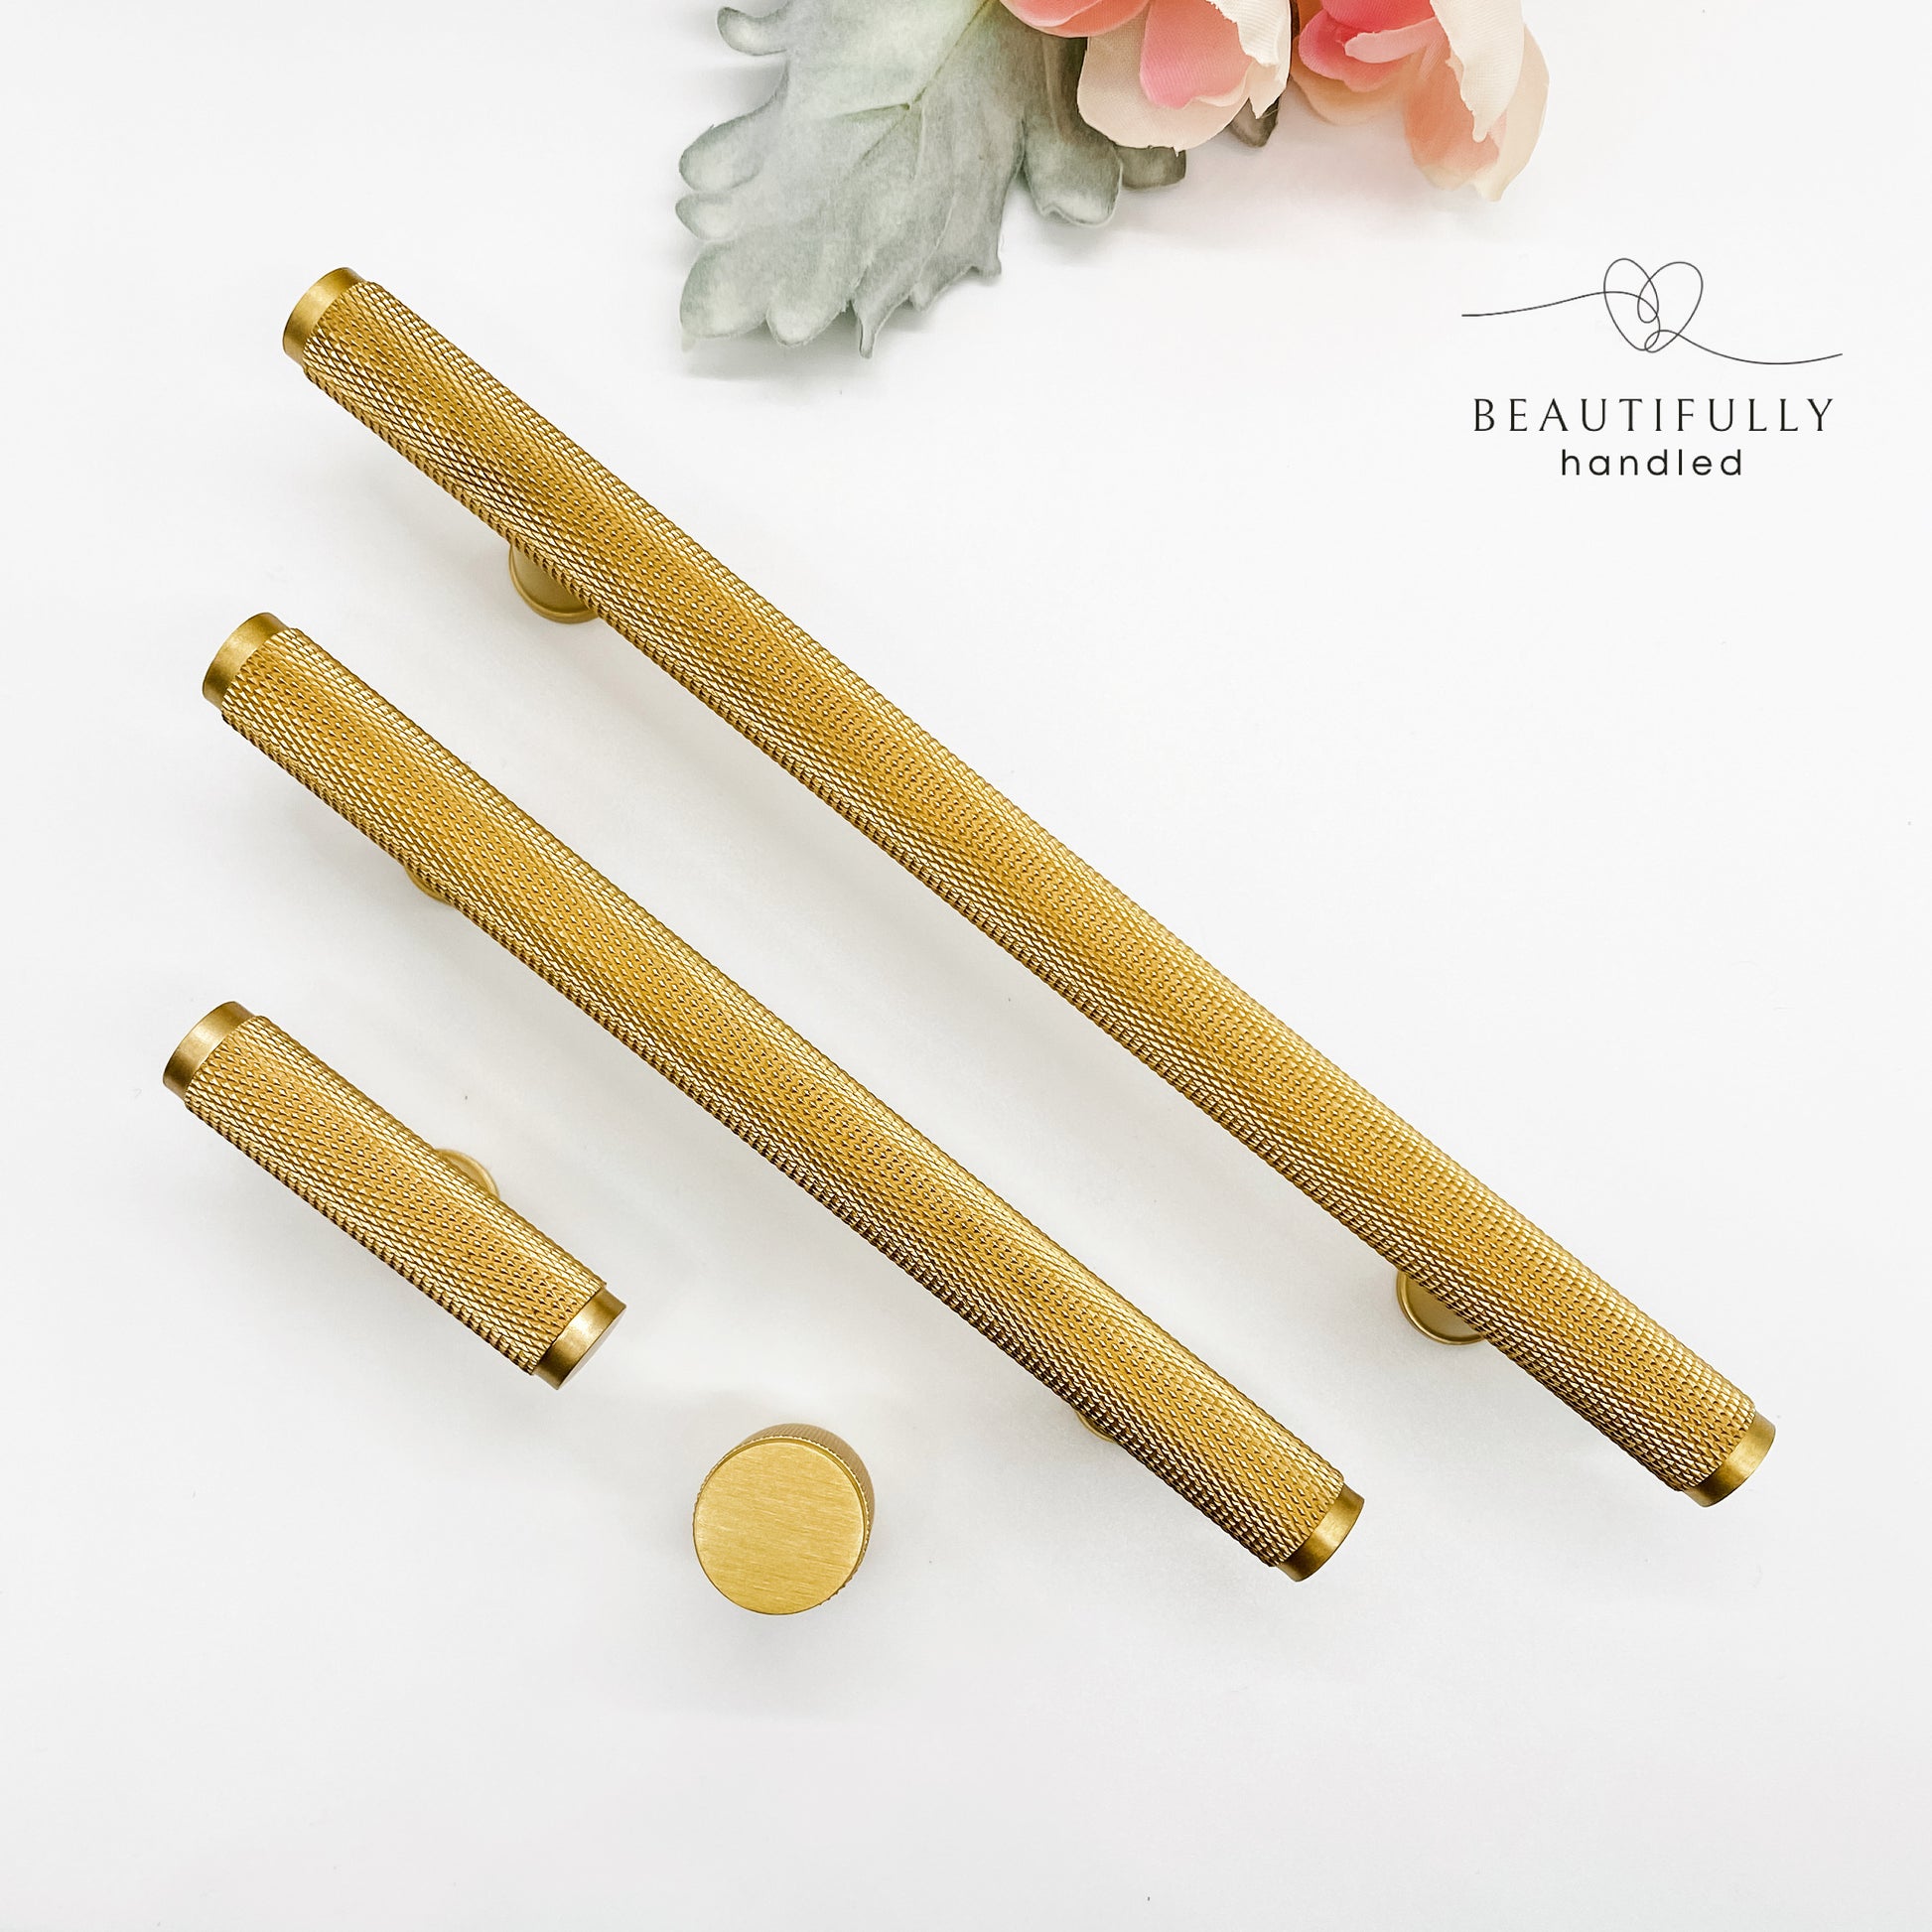 4 sizes of solid brass knurled drawer handles brass knob t bar and 96mm and 128mm sized handles on white background